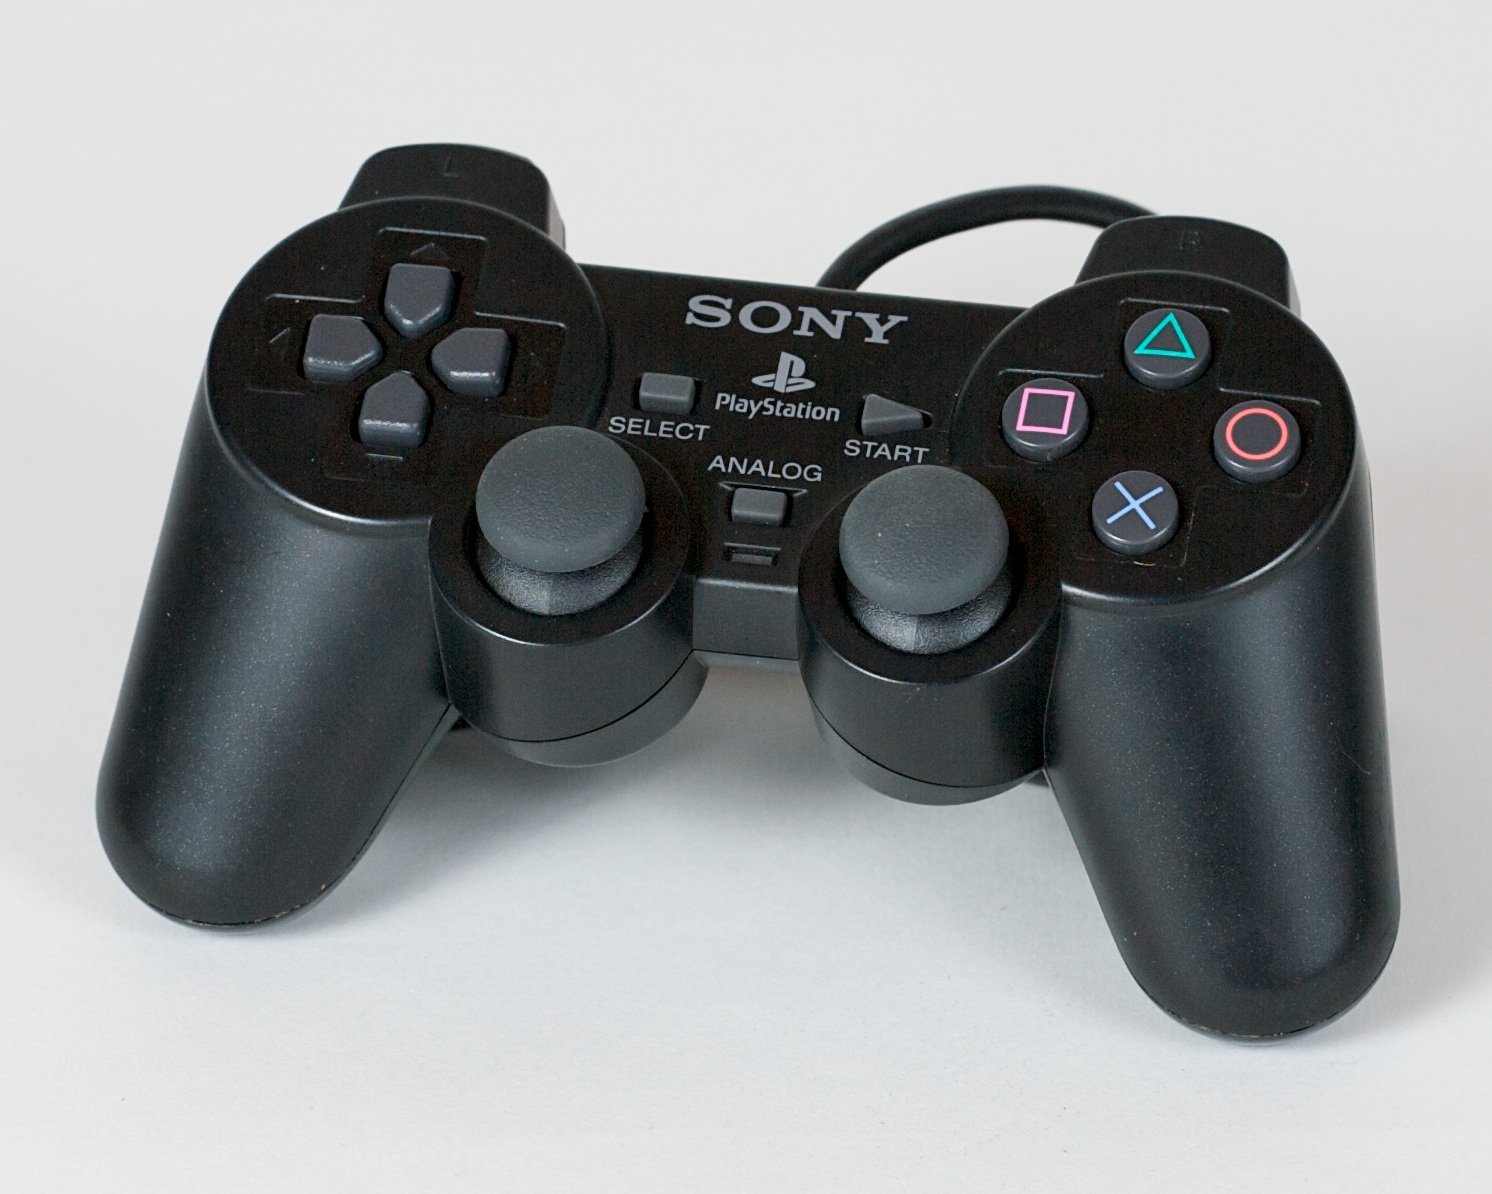 2 playstation controllers